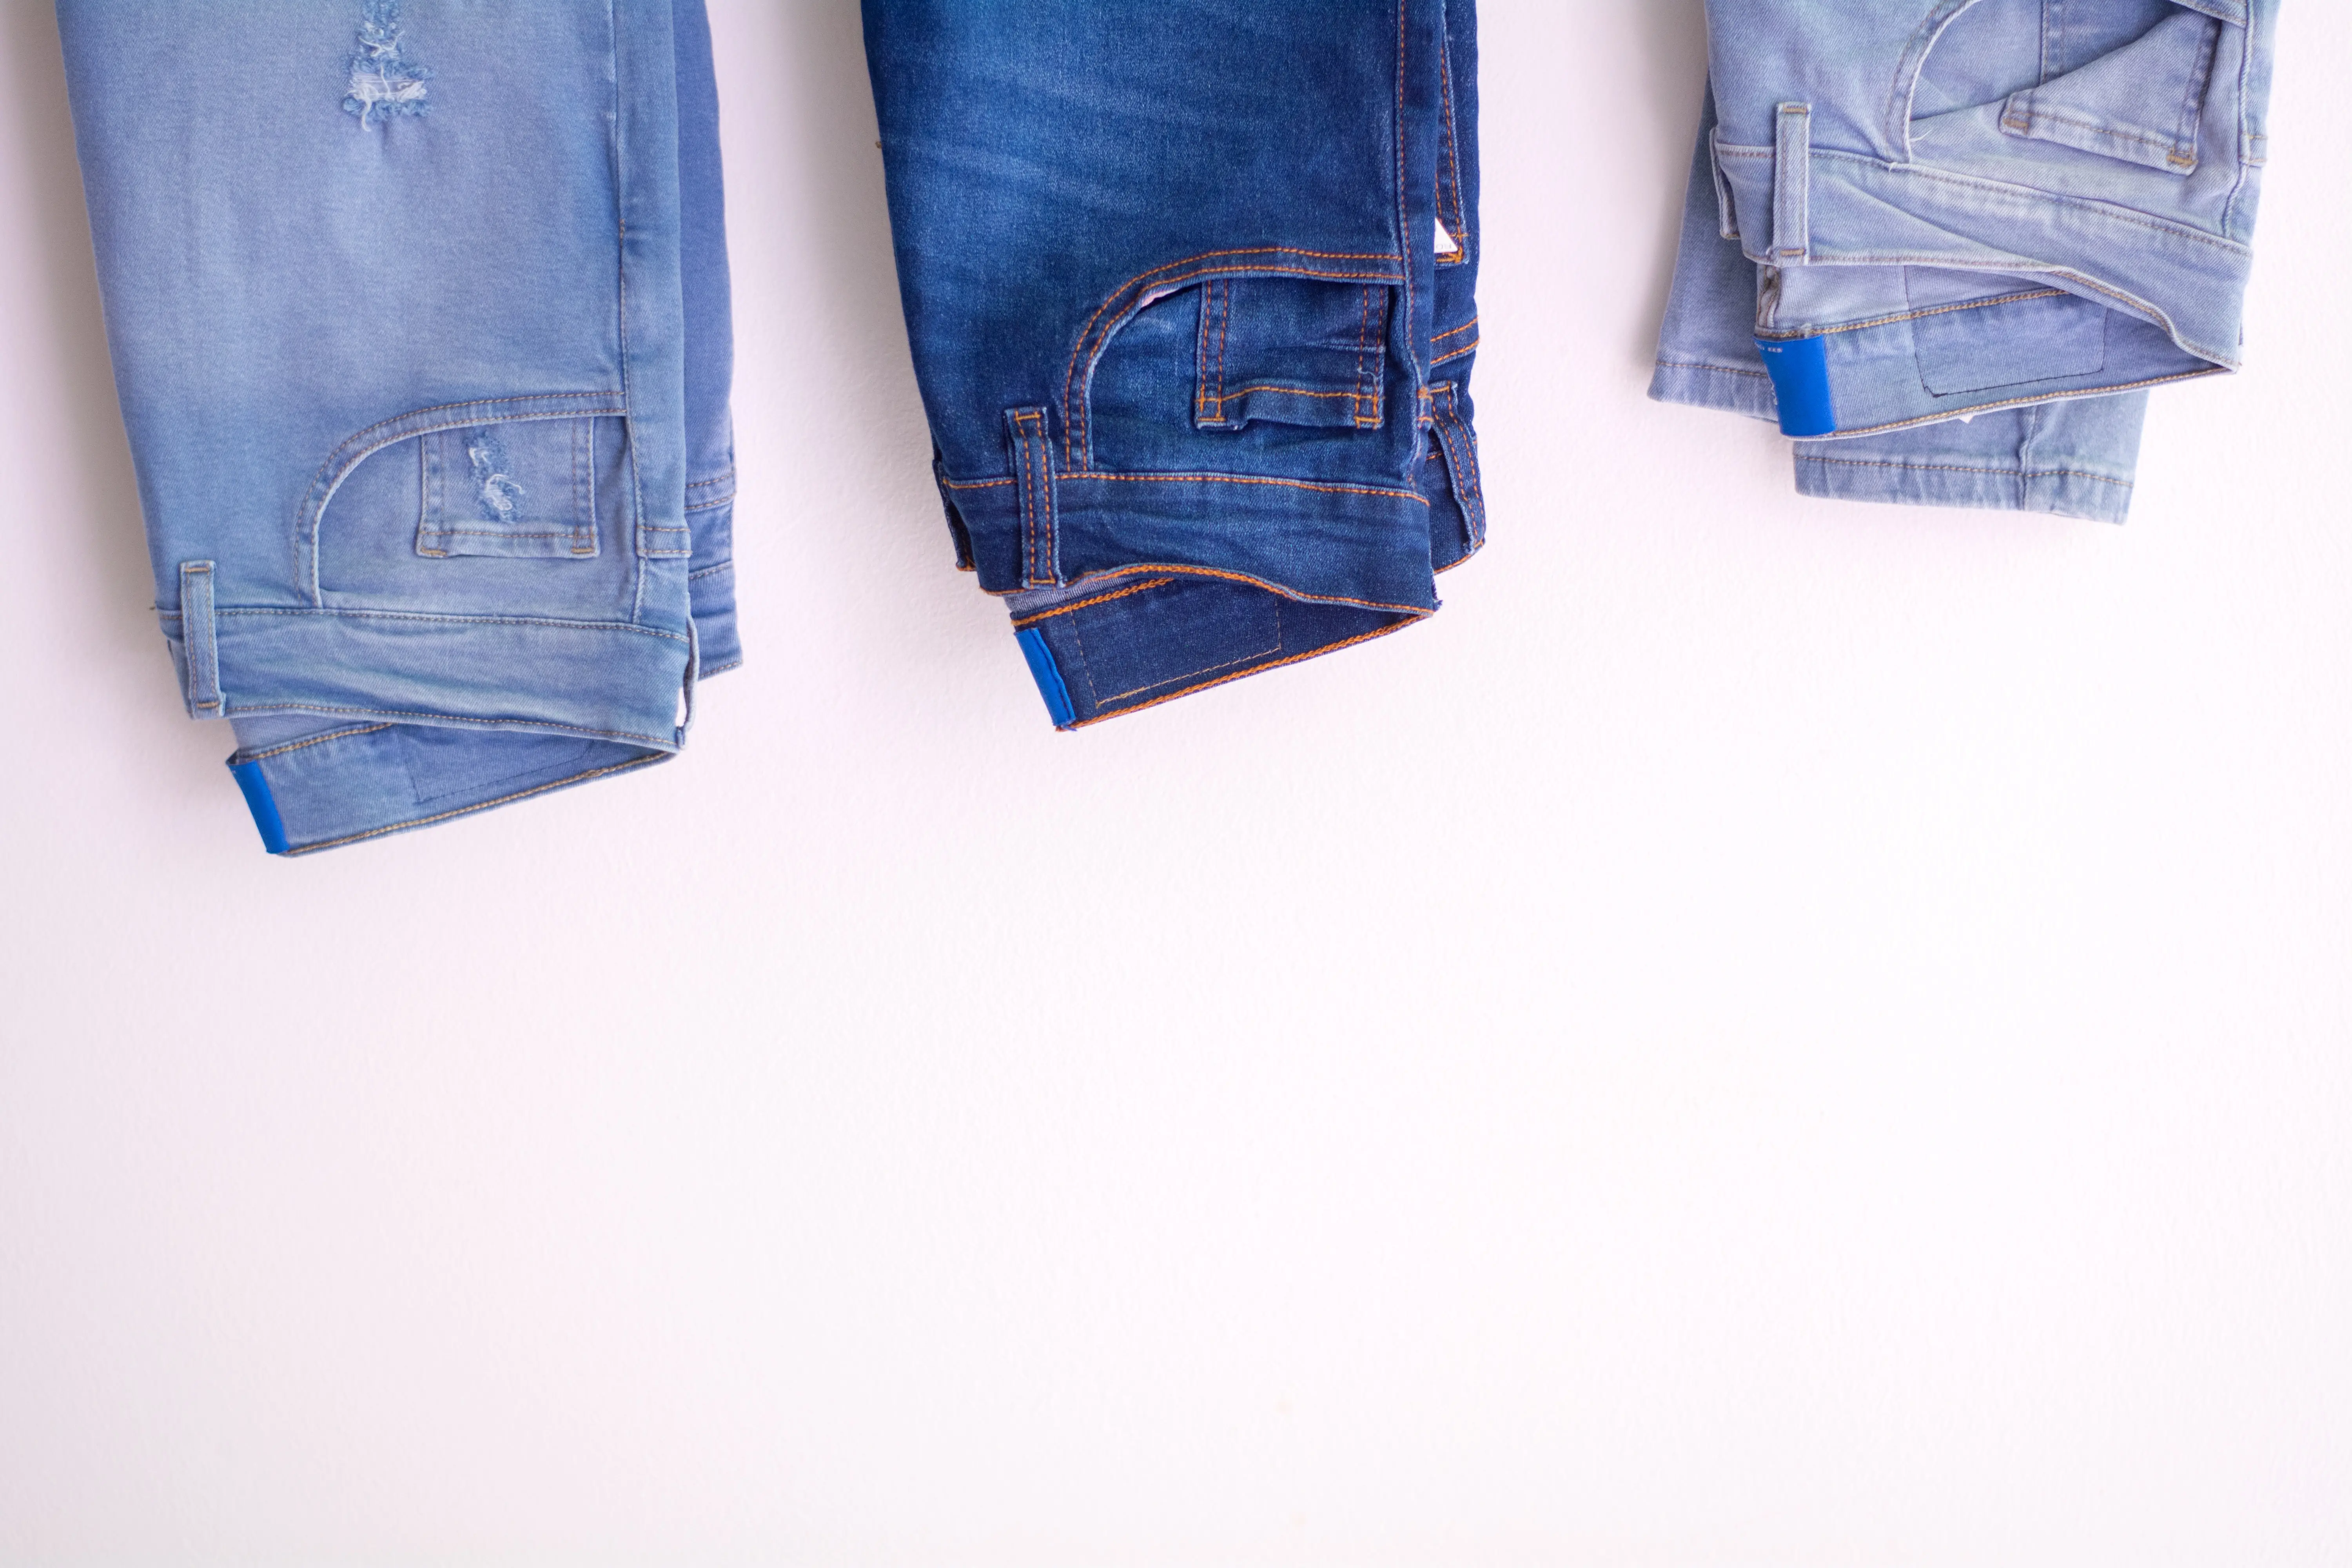 environmental impact of jeans production